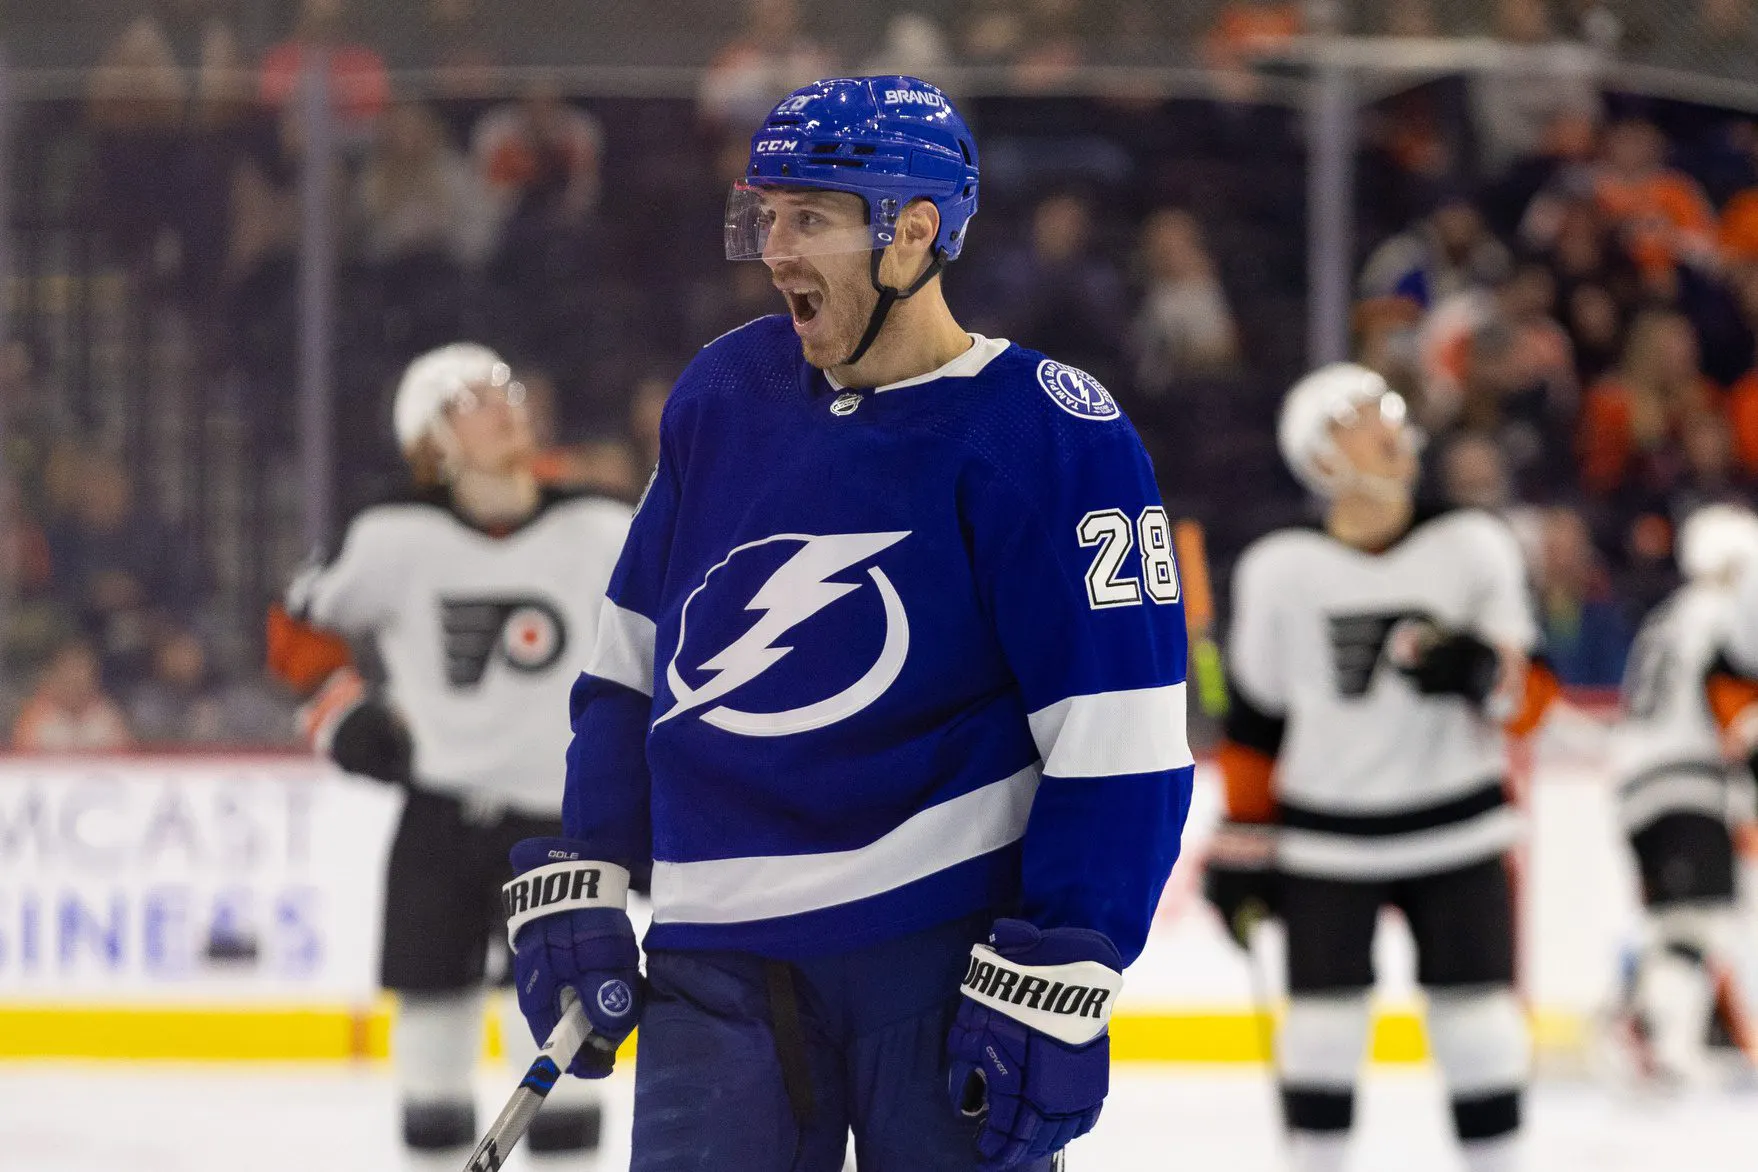 Tampa Bay Lightning defenseman Ian Cole fined $5,000 for kneeing